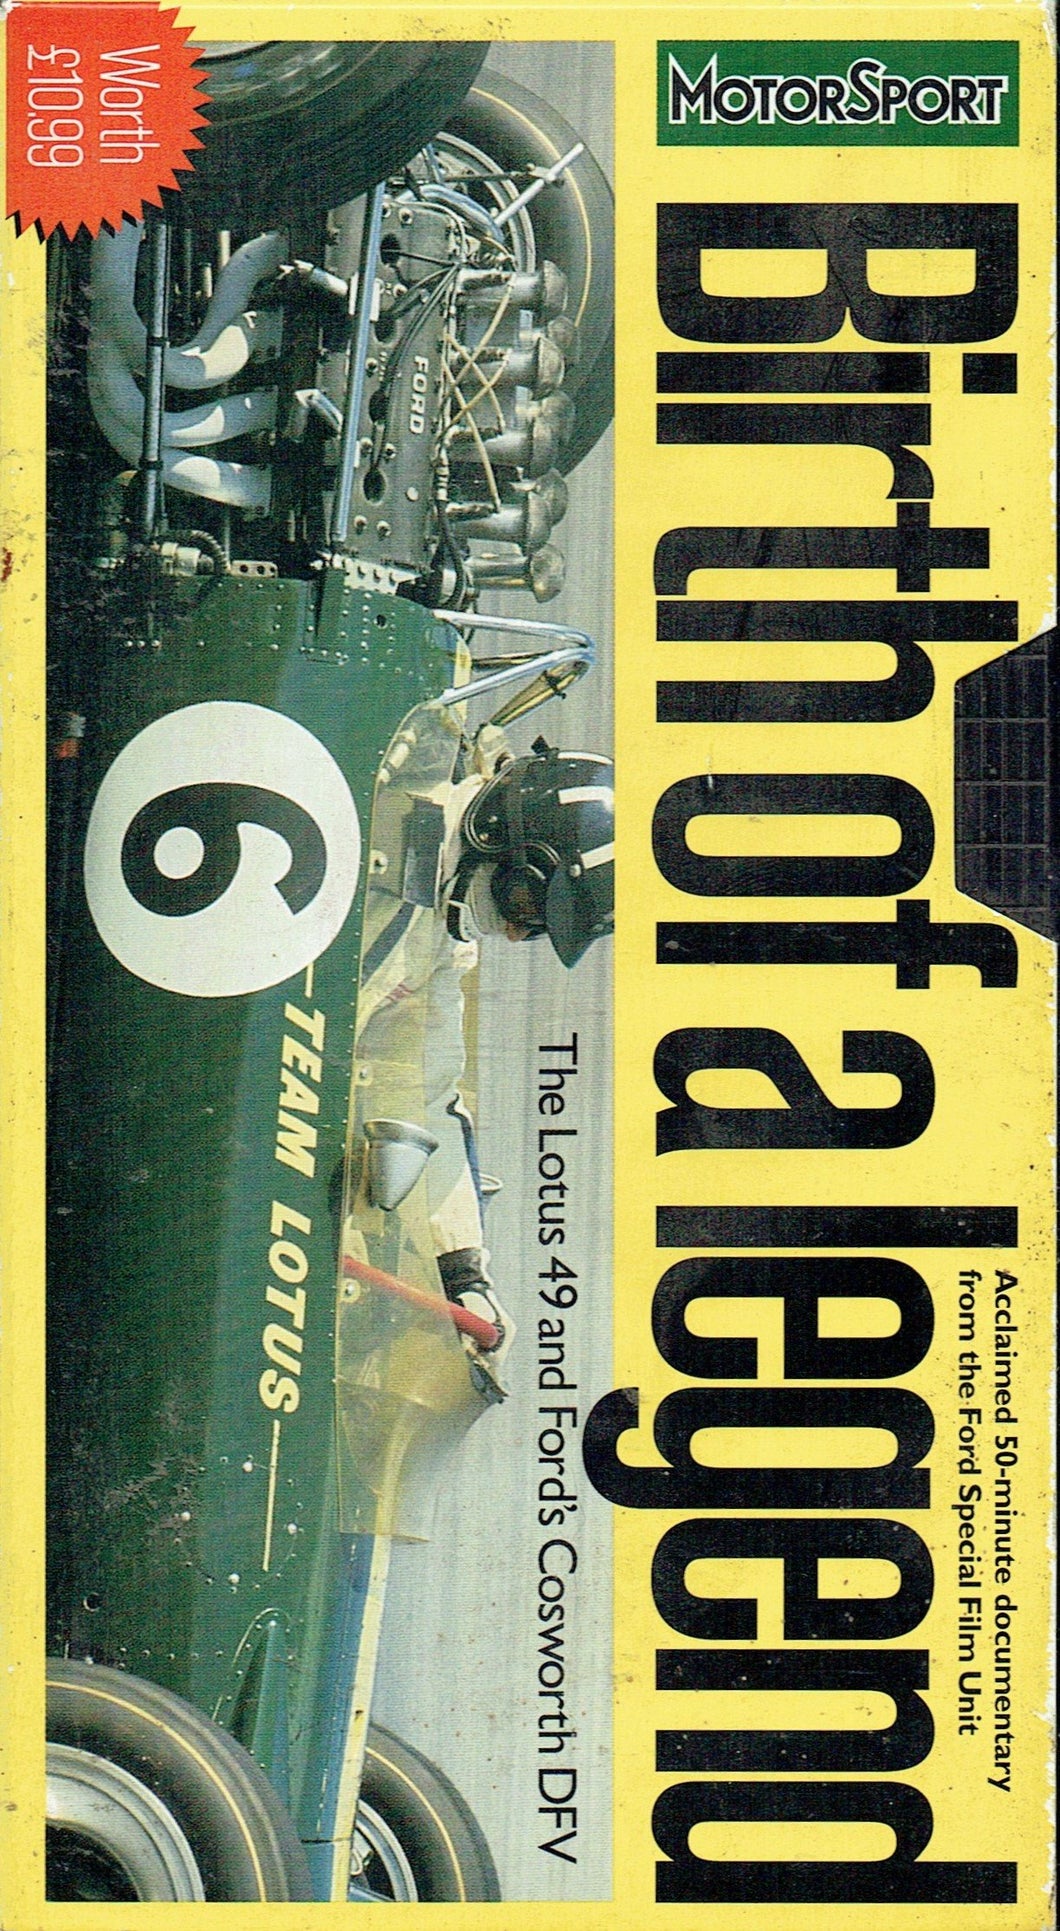 Birth of a Legend - The Lotus 49 and Ford's Cosworth DFV